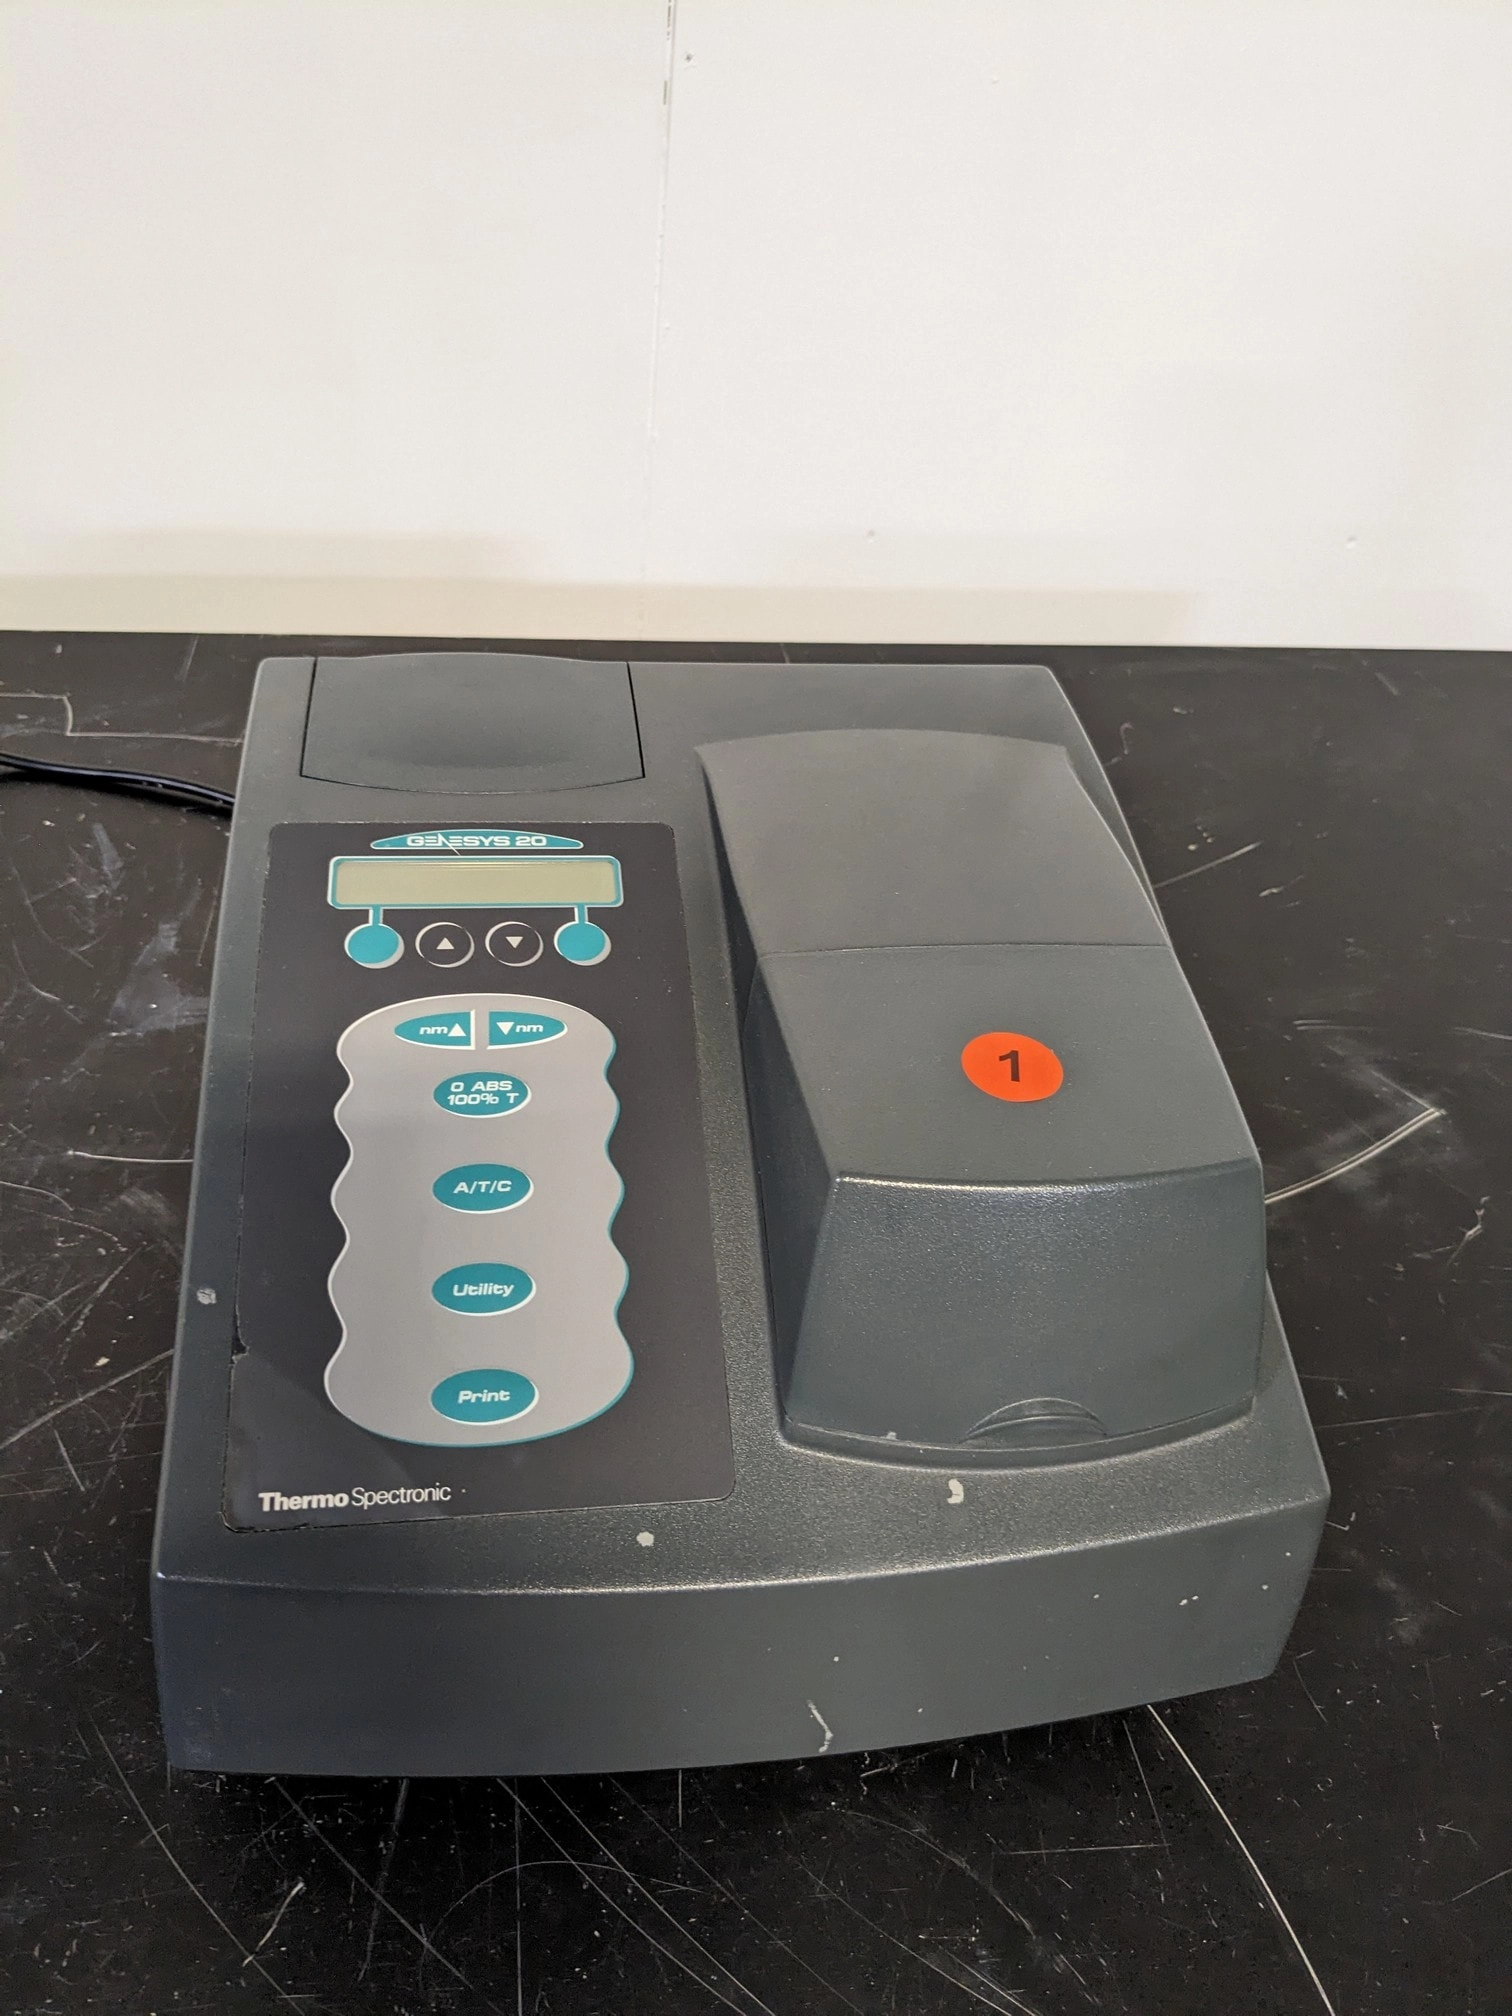 Thermo Spectronic  Cat. 4001/4 Genesys 20 Visible Spectrometer